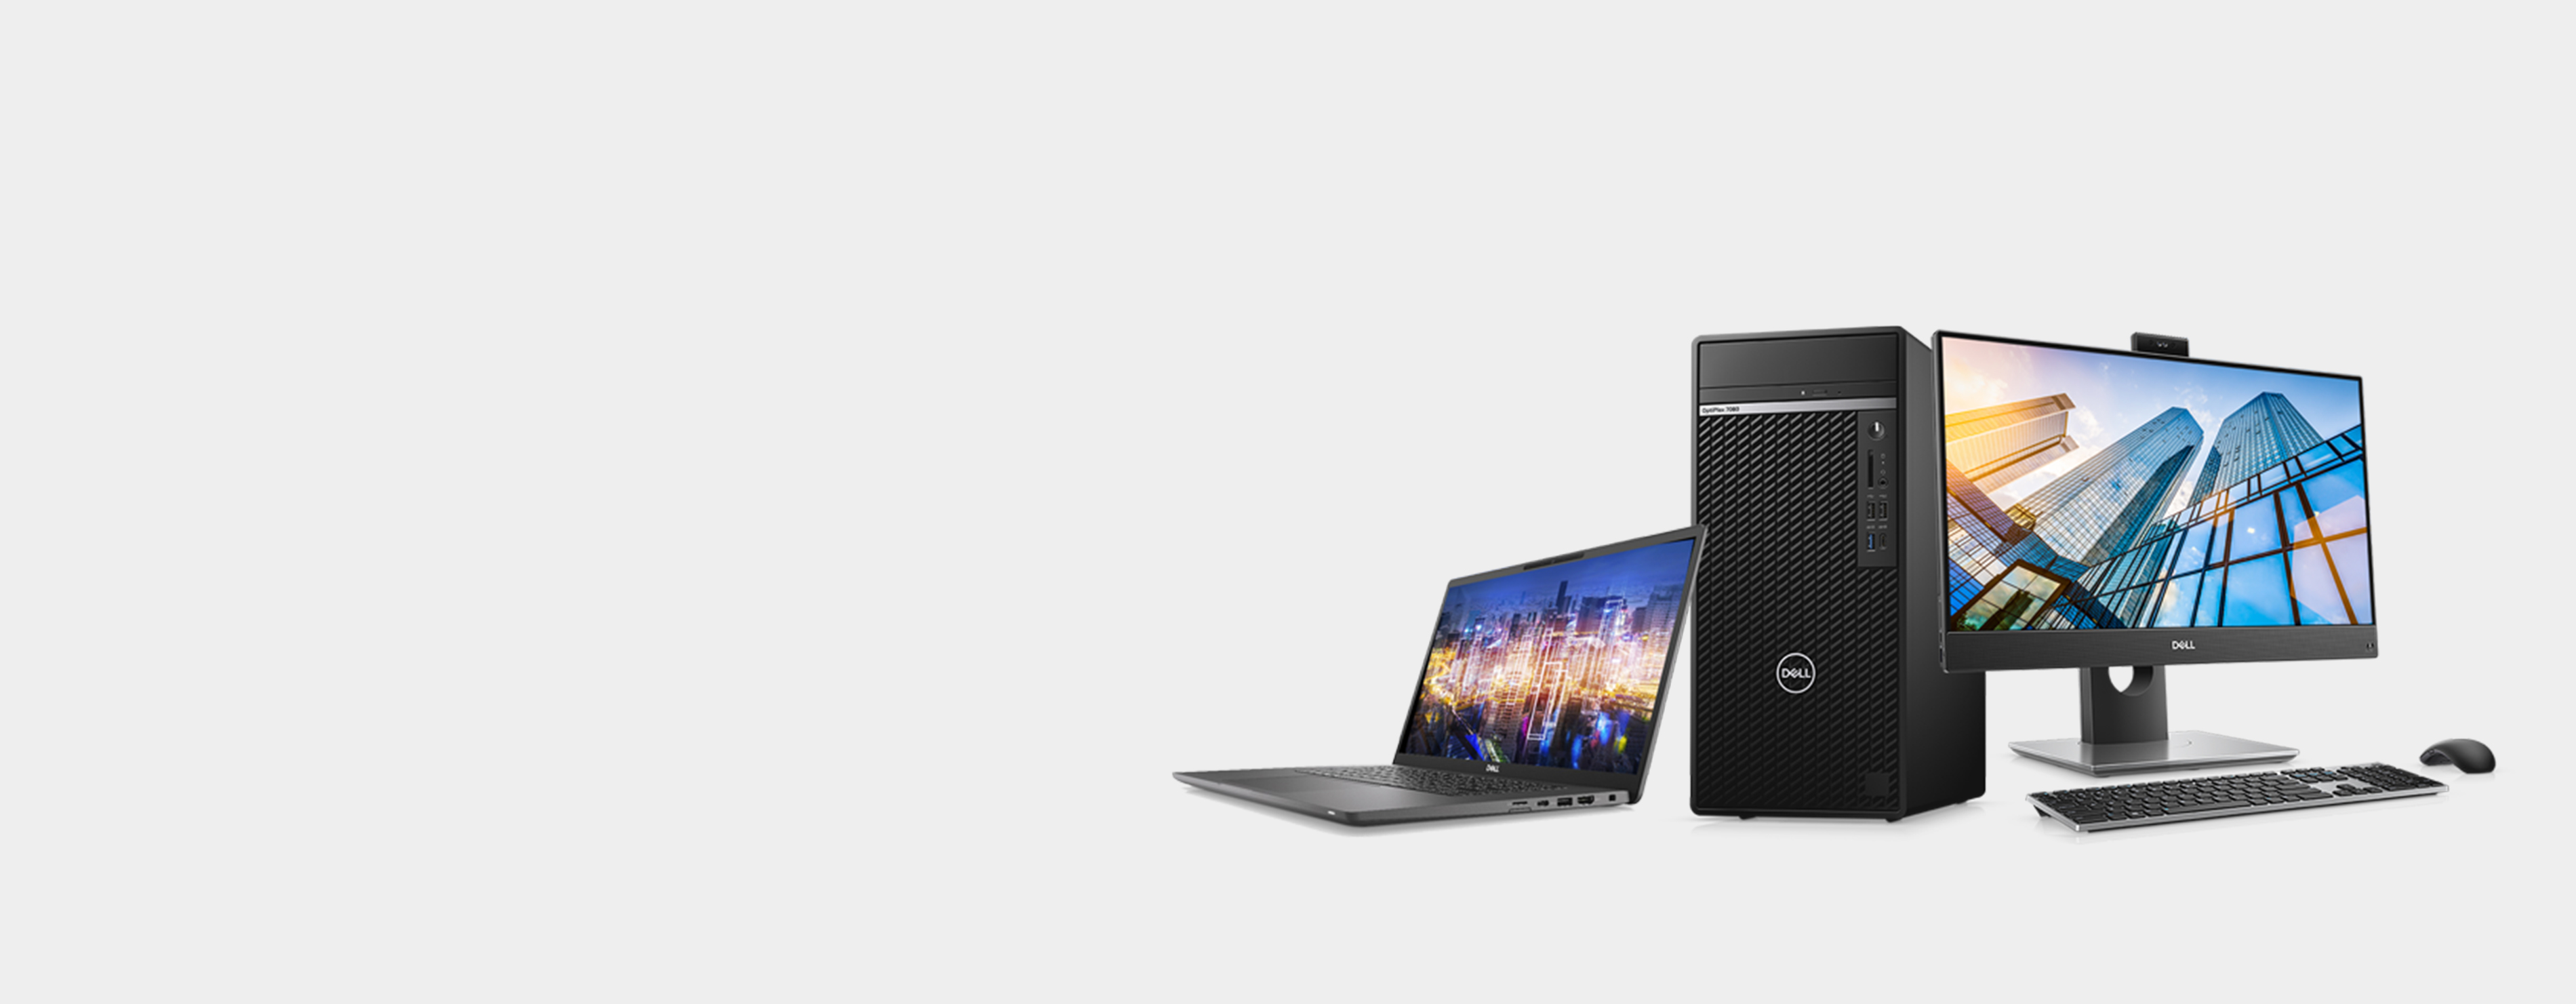 Dell Latitude 7320 Detachable: “A 13.3in slate that can either be used on its own or with a detachable keyboard." — IT Pro